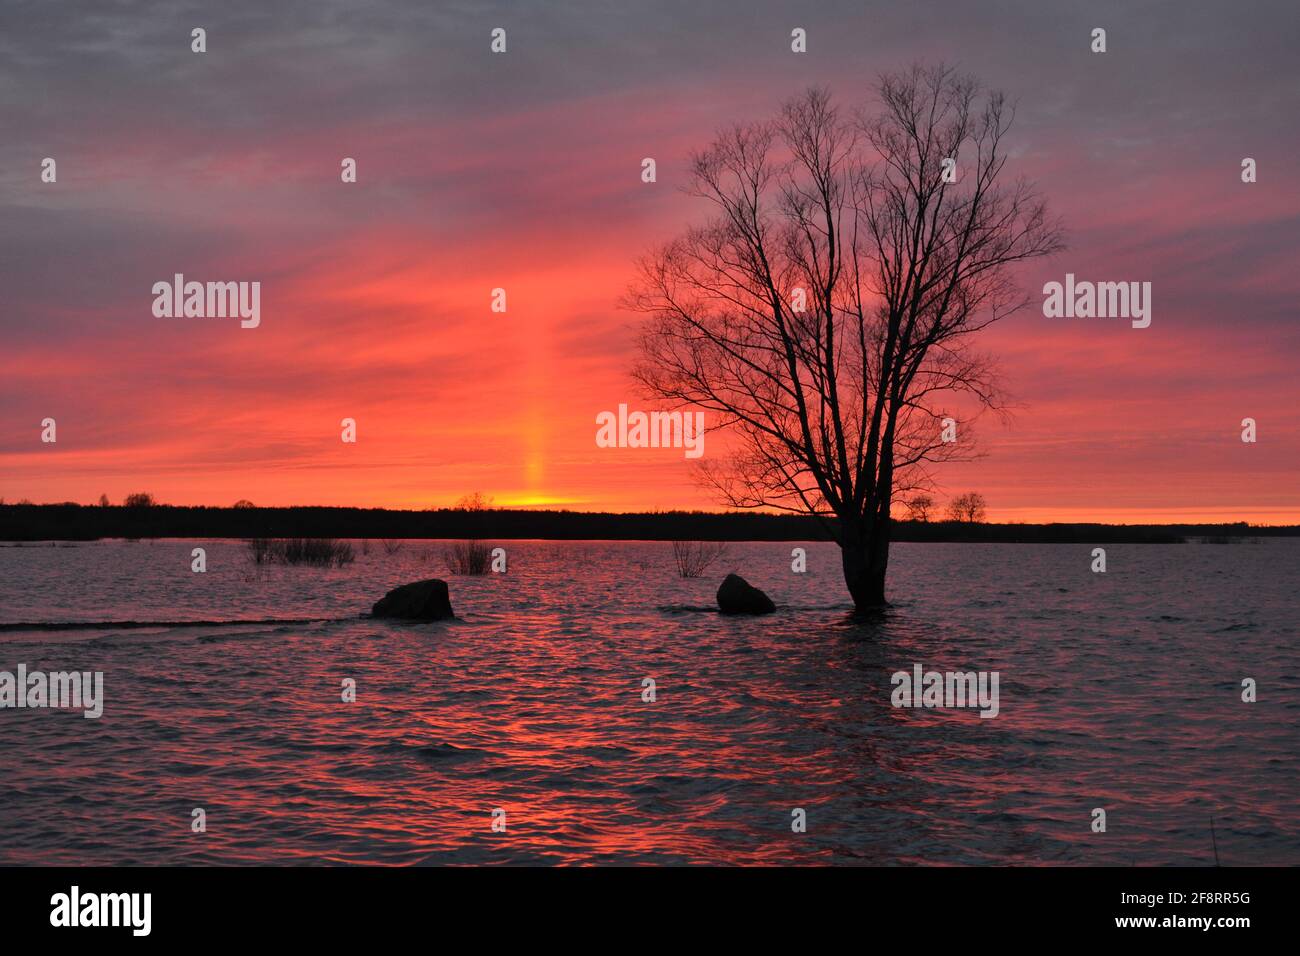 Panorama of the lake at a beautiful red sunset with a reflection in calm water with a wooden silhouette. Sunset red landscaape Stock Photo